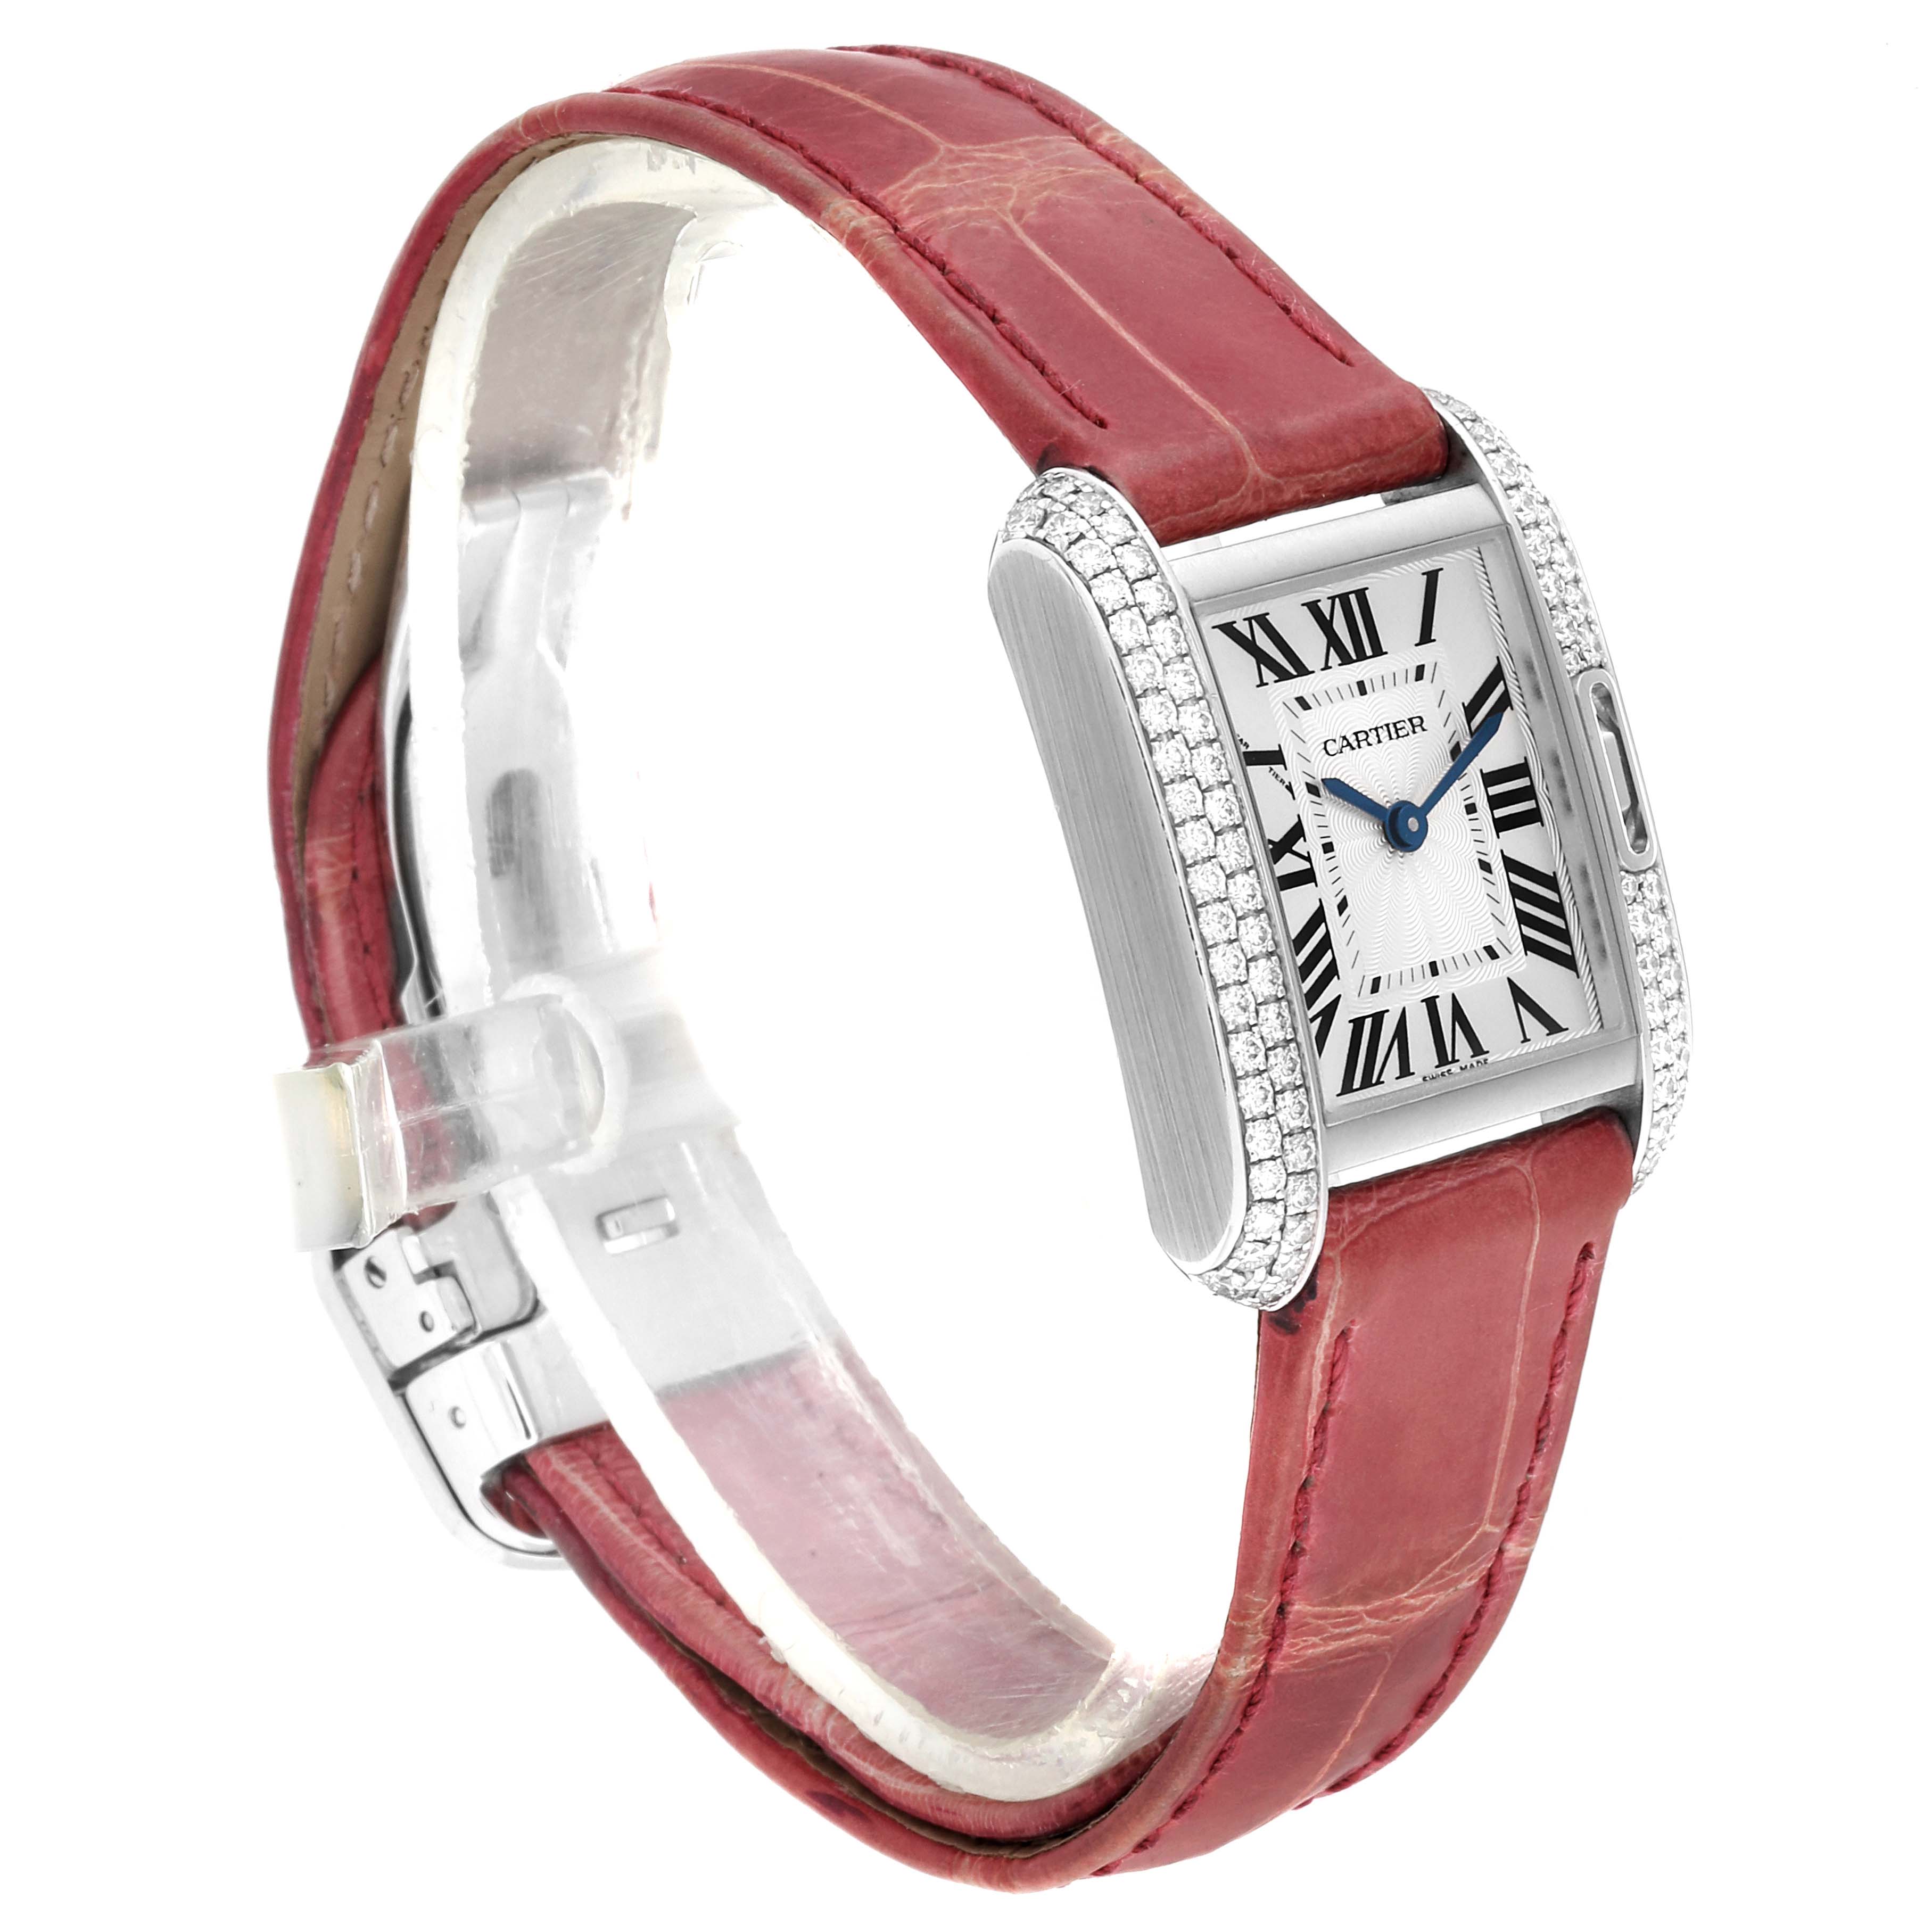 cartier tank anglaise white gold price